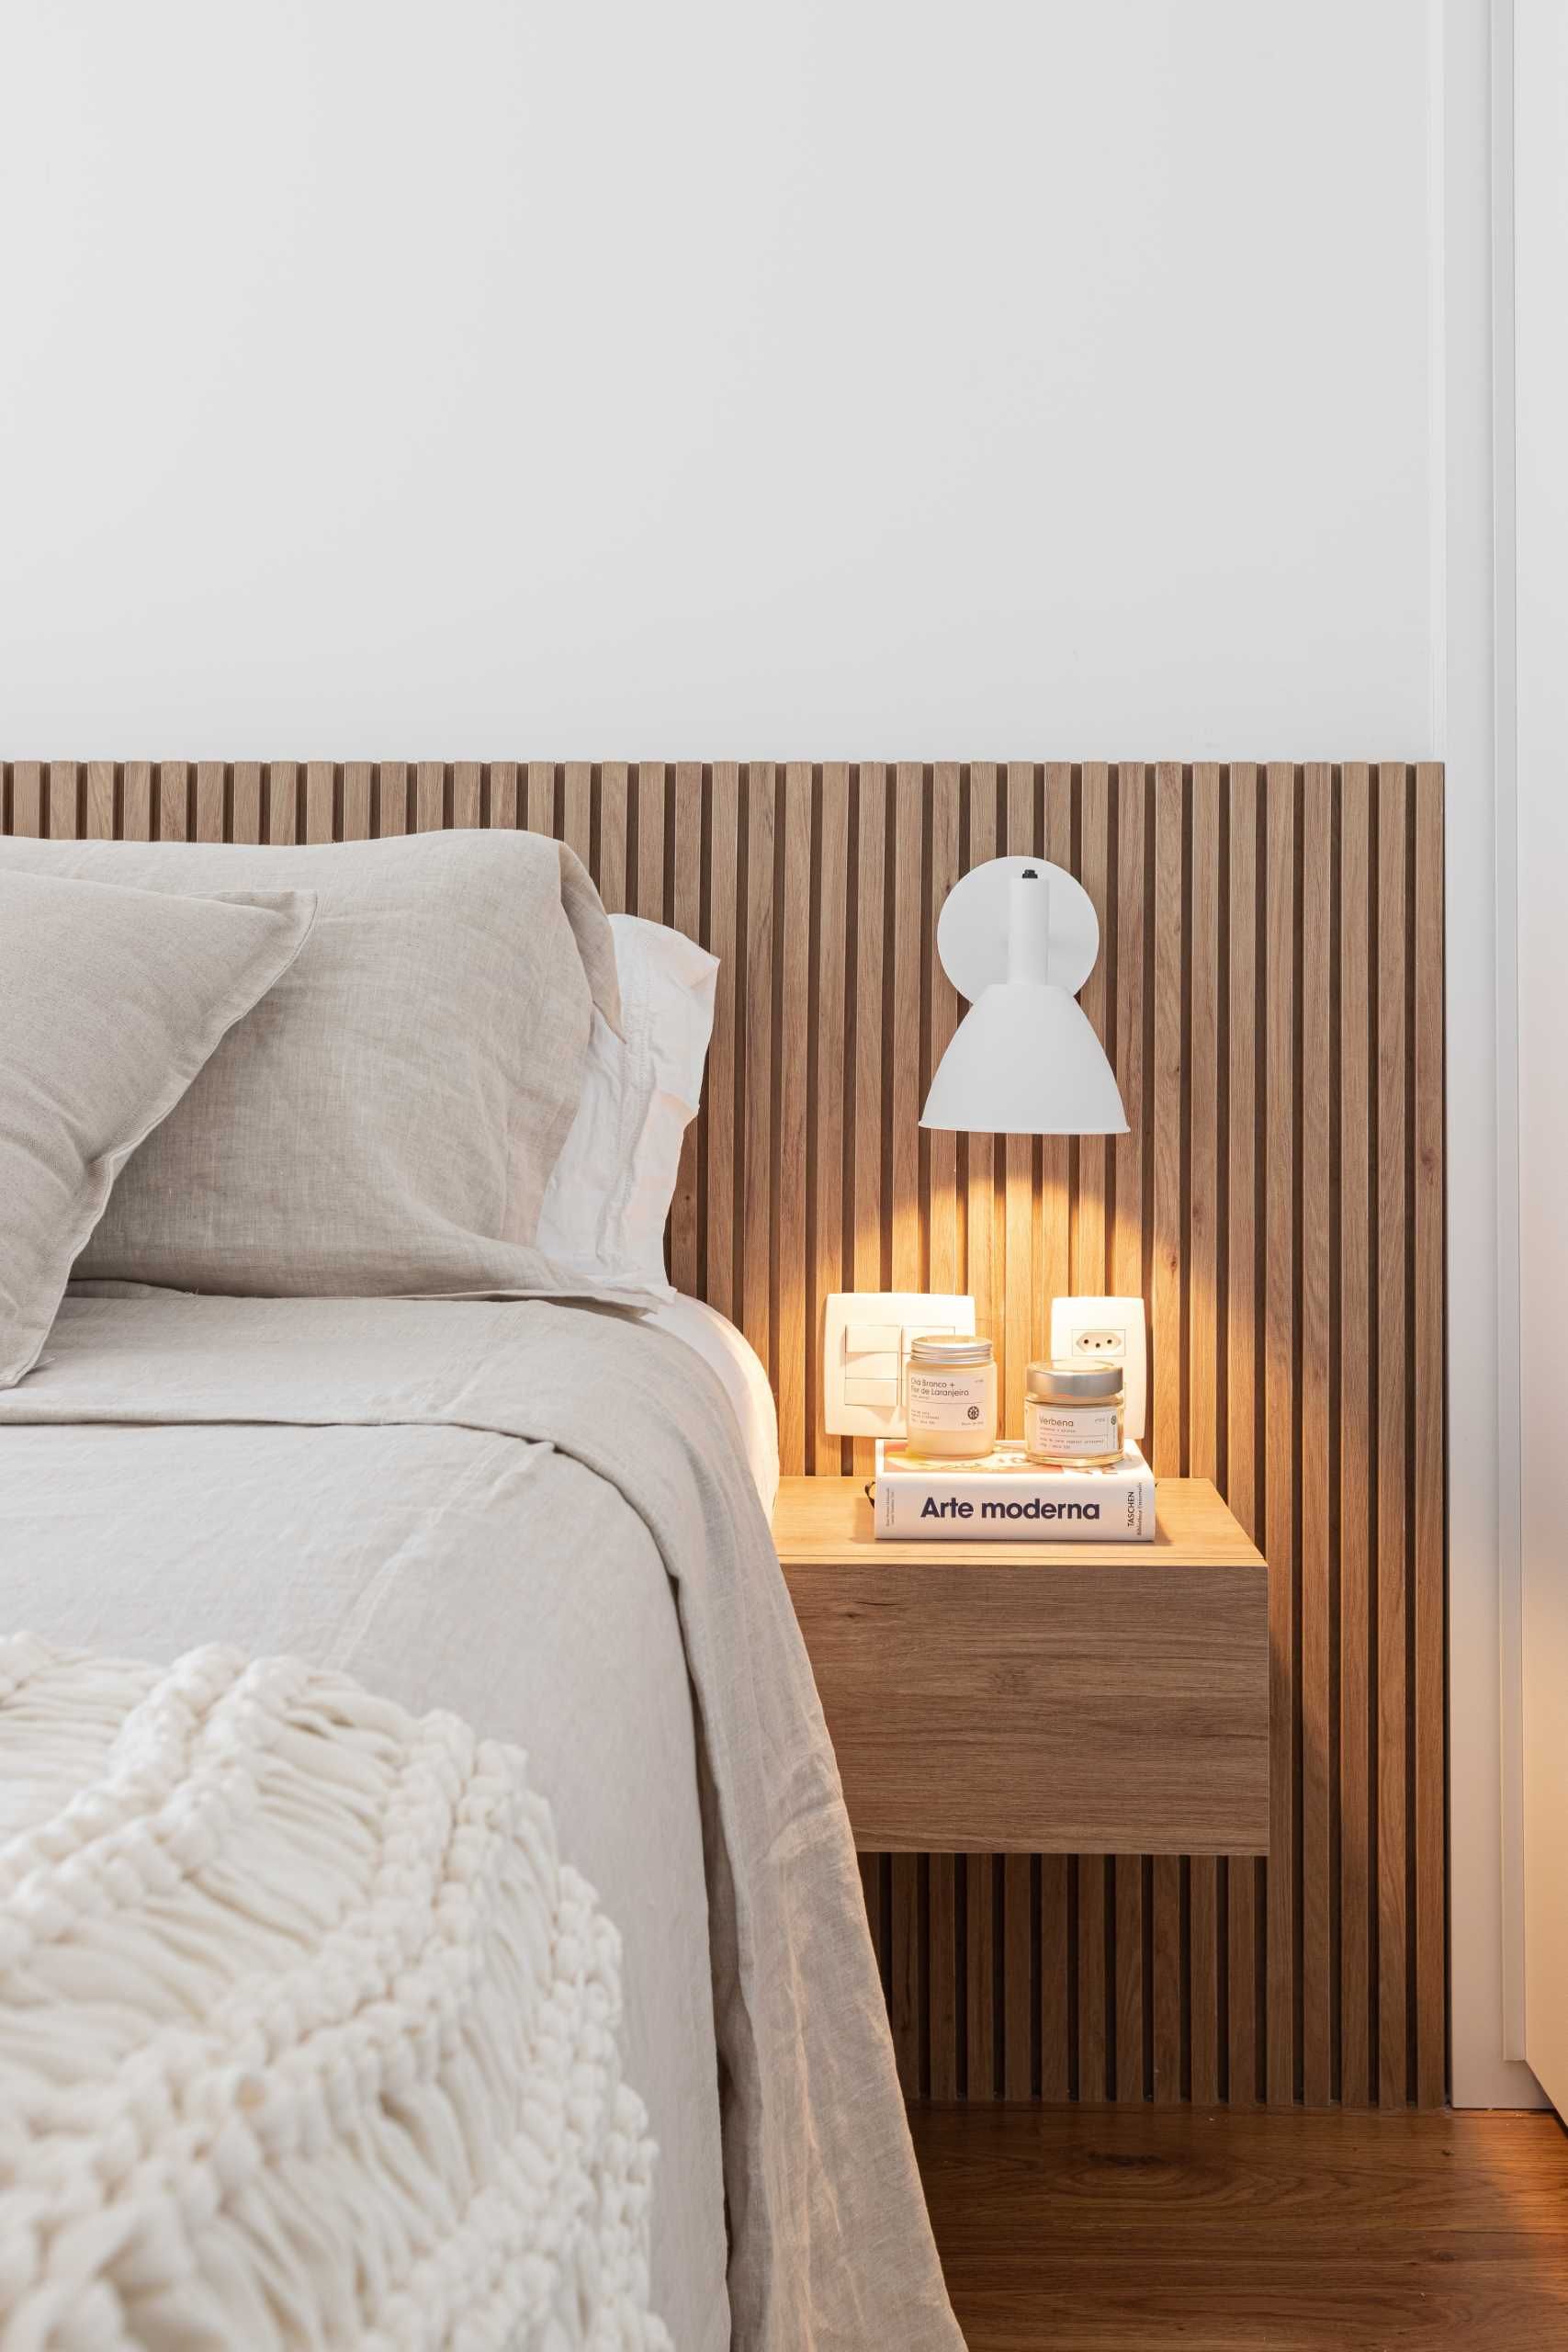 Bedside Lamps For Bedroom Illuminate Your Bedroom With These Stylish Lamp Options